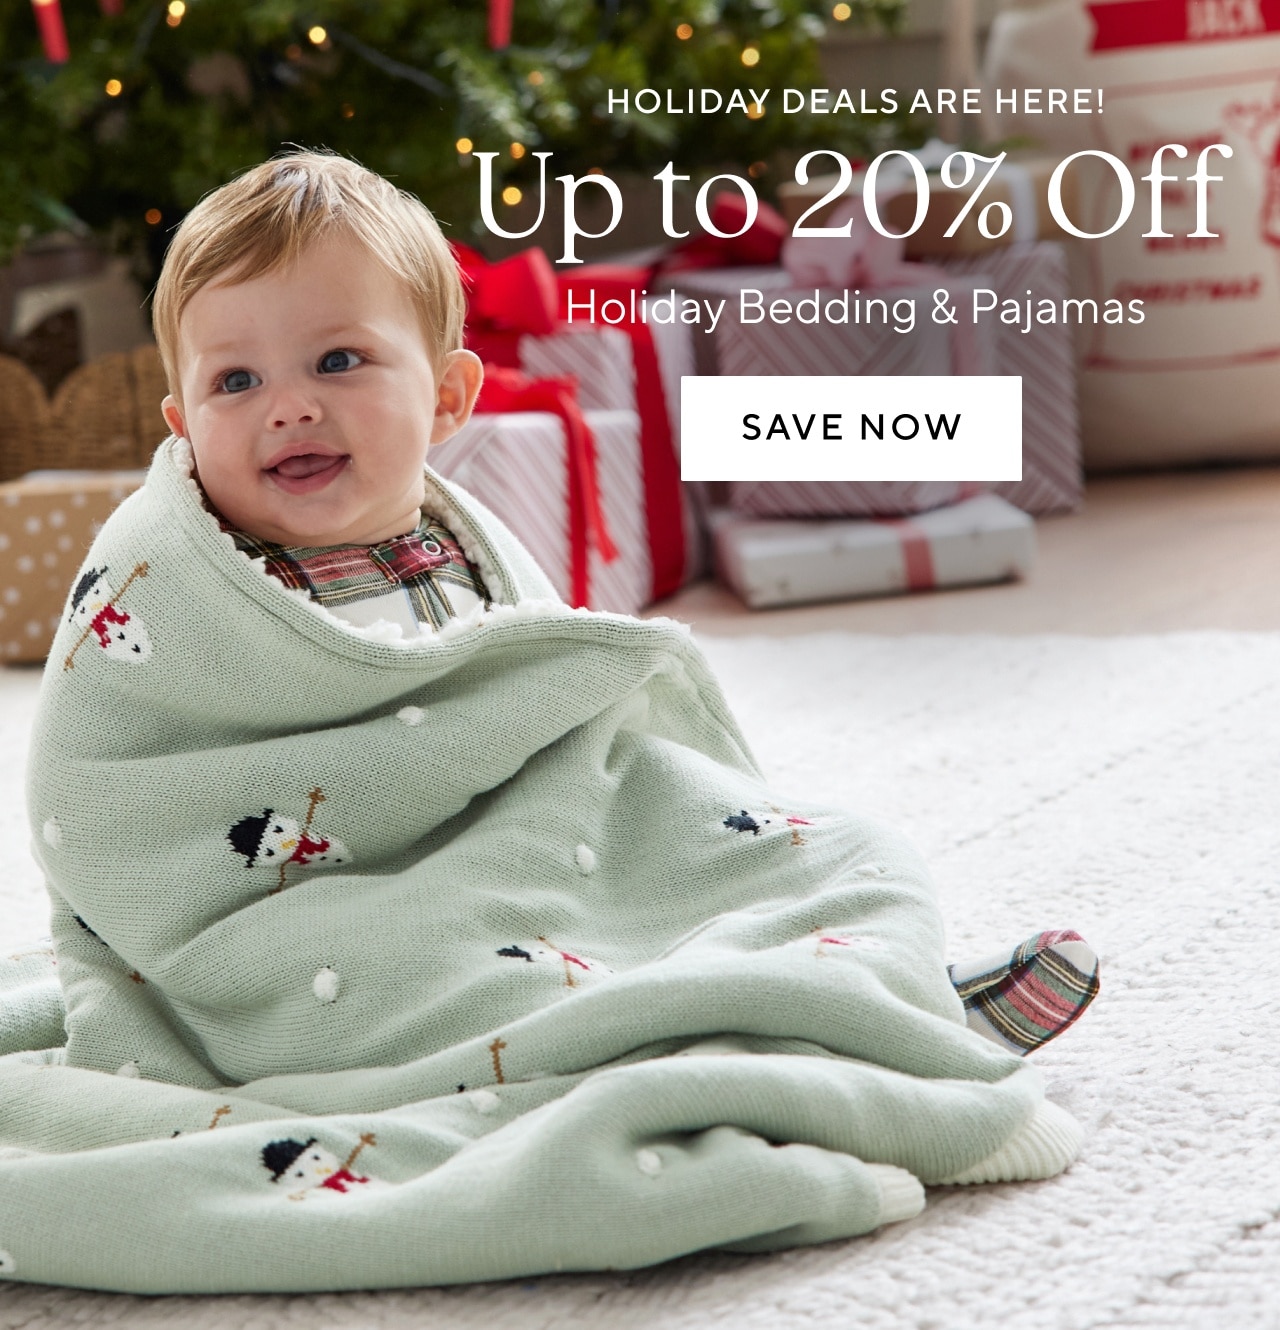 HOLIDAY DEALS ARE HERE! 20% OFF SELECT BEDDING & PAJAMAS